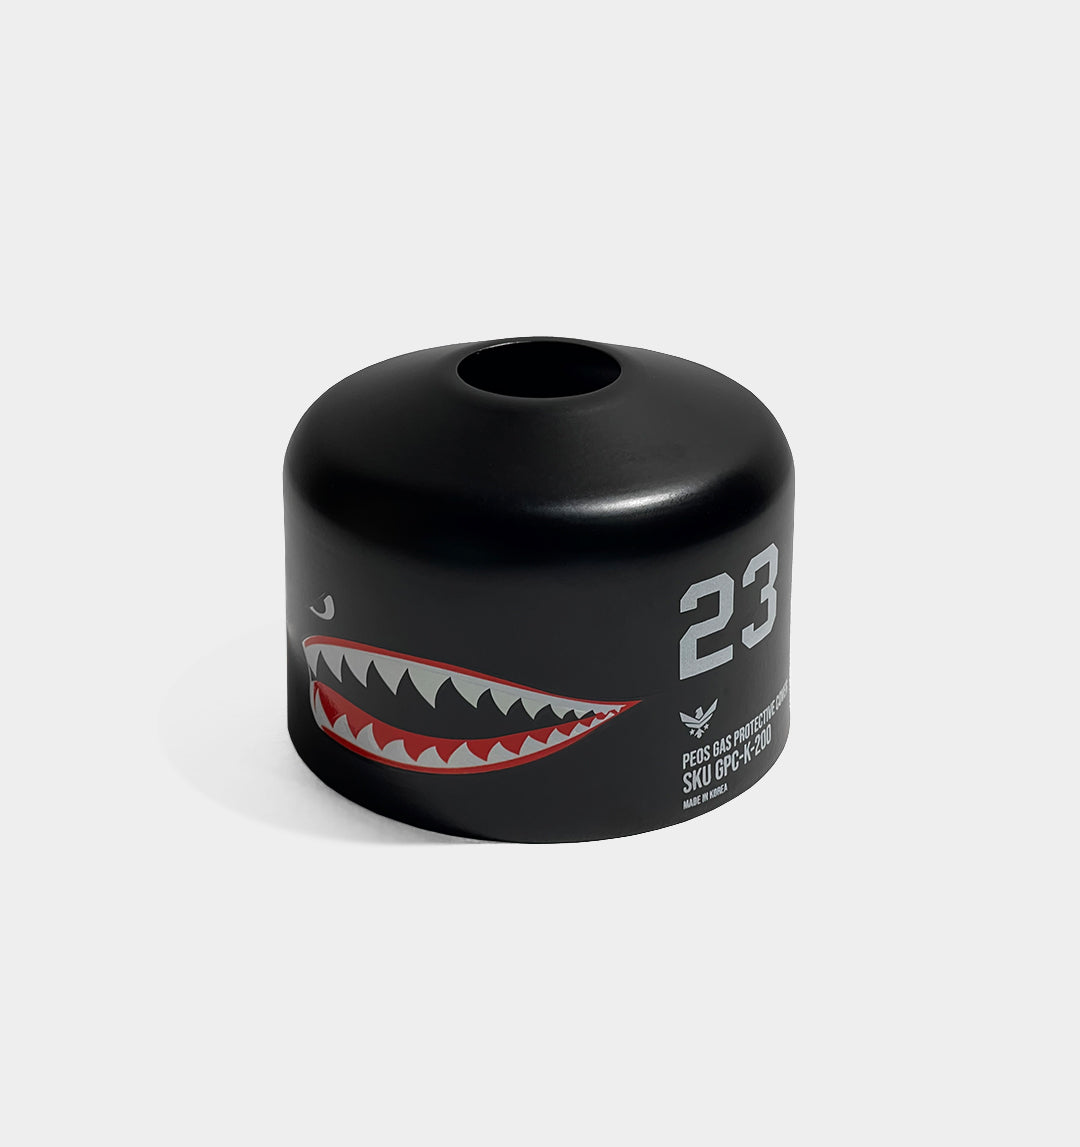 ISO Butane Protective Cover-Shark Mouth (Pilot Edition)